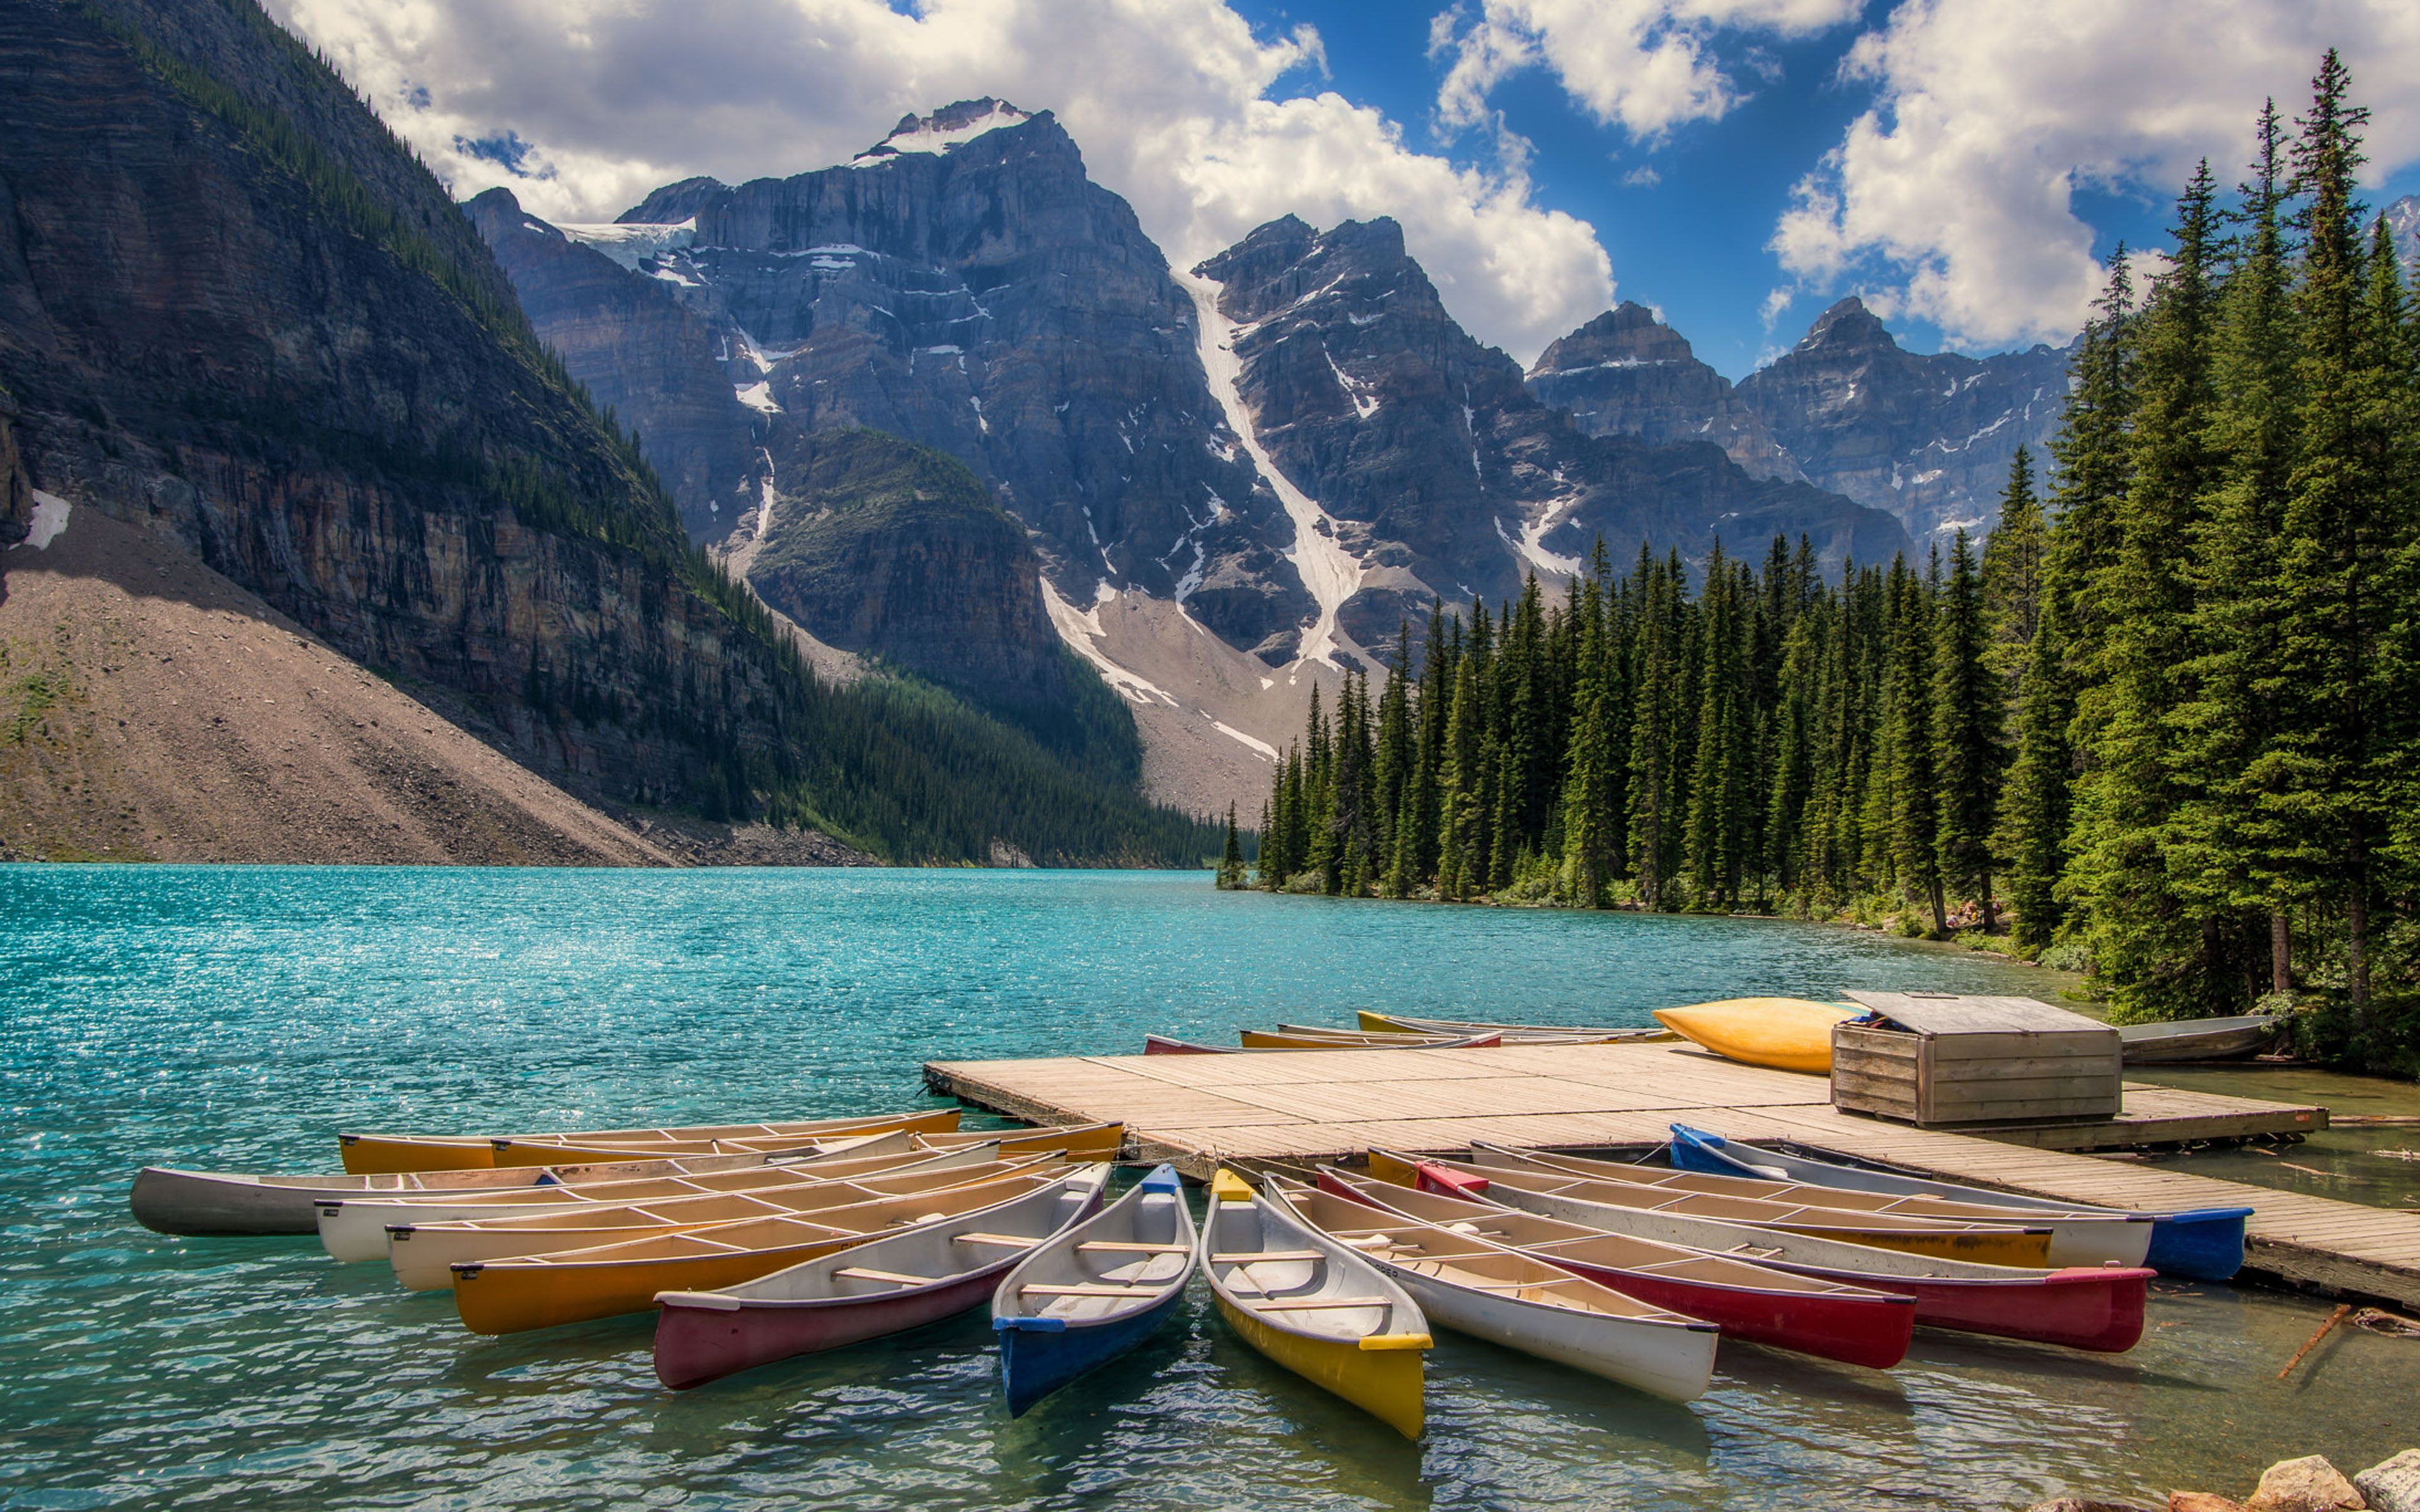 Kayaks In Lake Moraine Banff Canada Landscape Photography Ultra HD Wallpaper And Lap. Canada landscape, Landscape photography, Sunset landscape photography